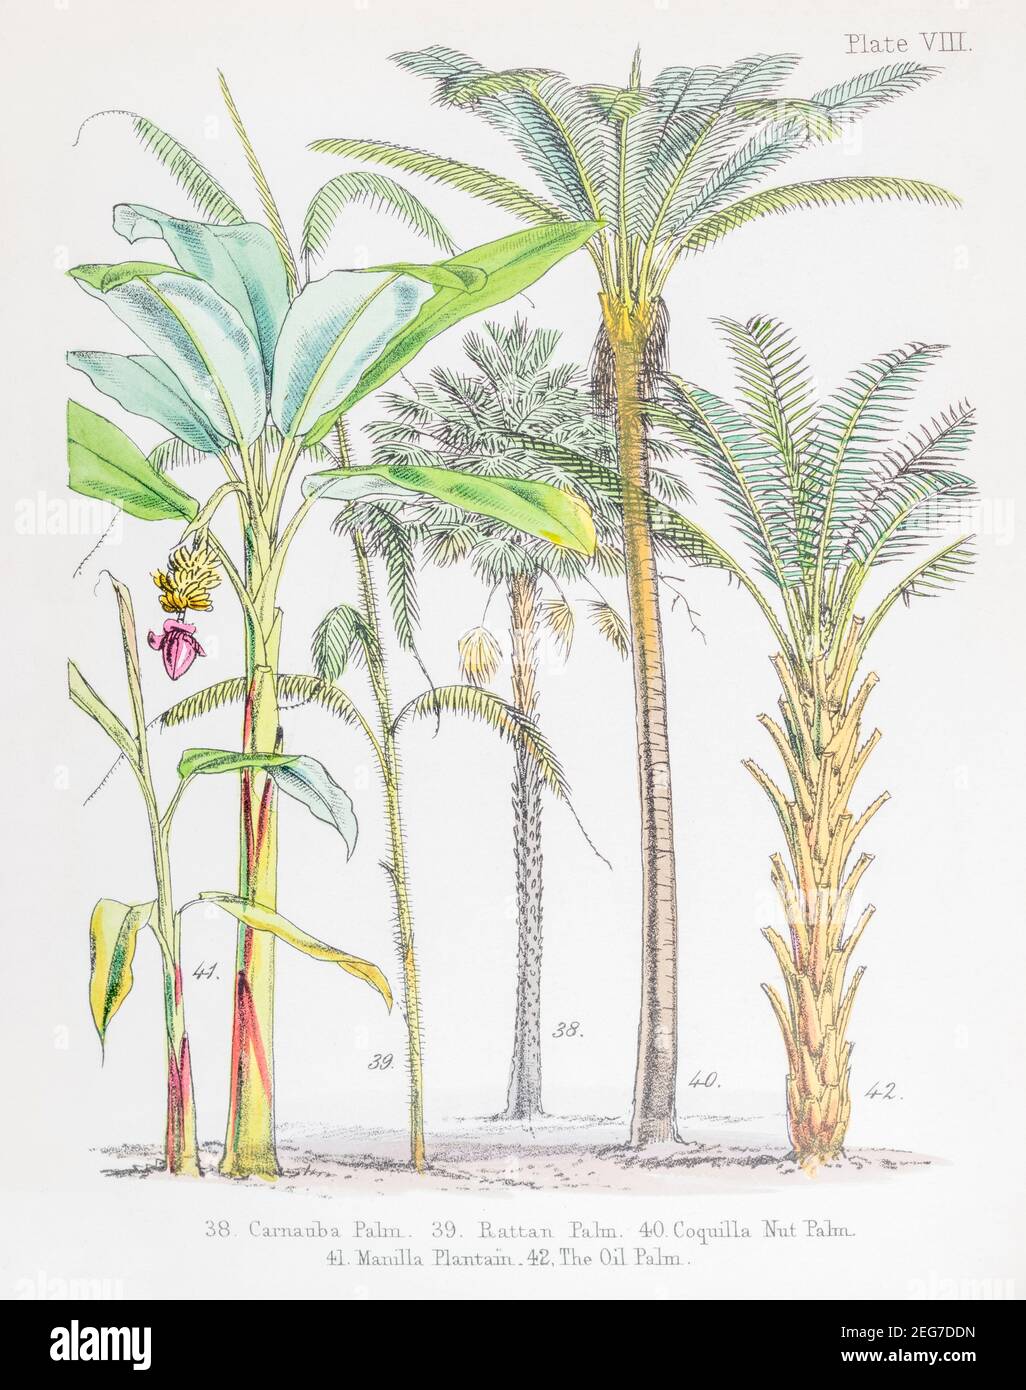 19th c. hand-painted Victorian botanical illustration of Carnauba Wax Palm, Rattan, Coquilla nut Palms, Manilla Plantain & Oil Palm. See notes. Stock Photo